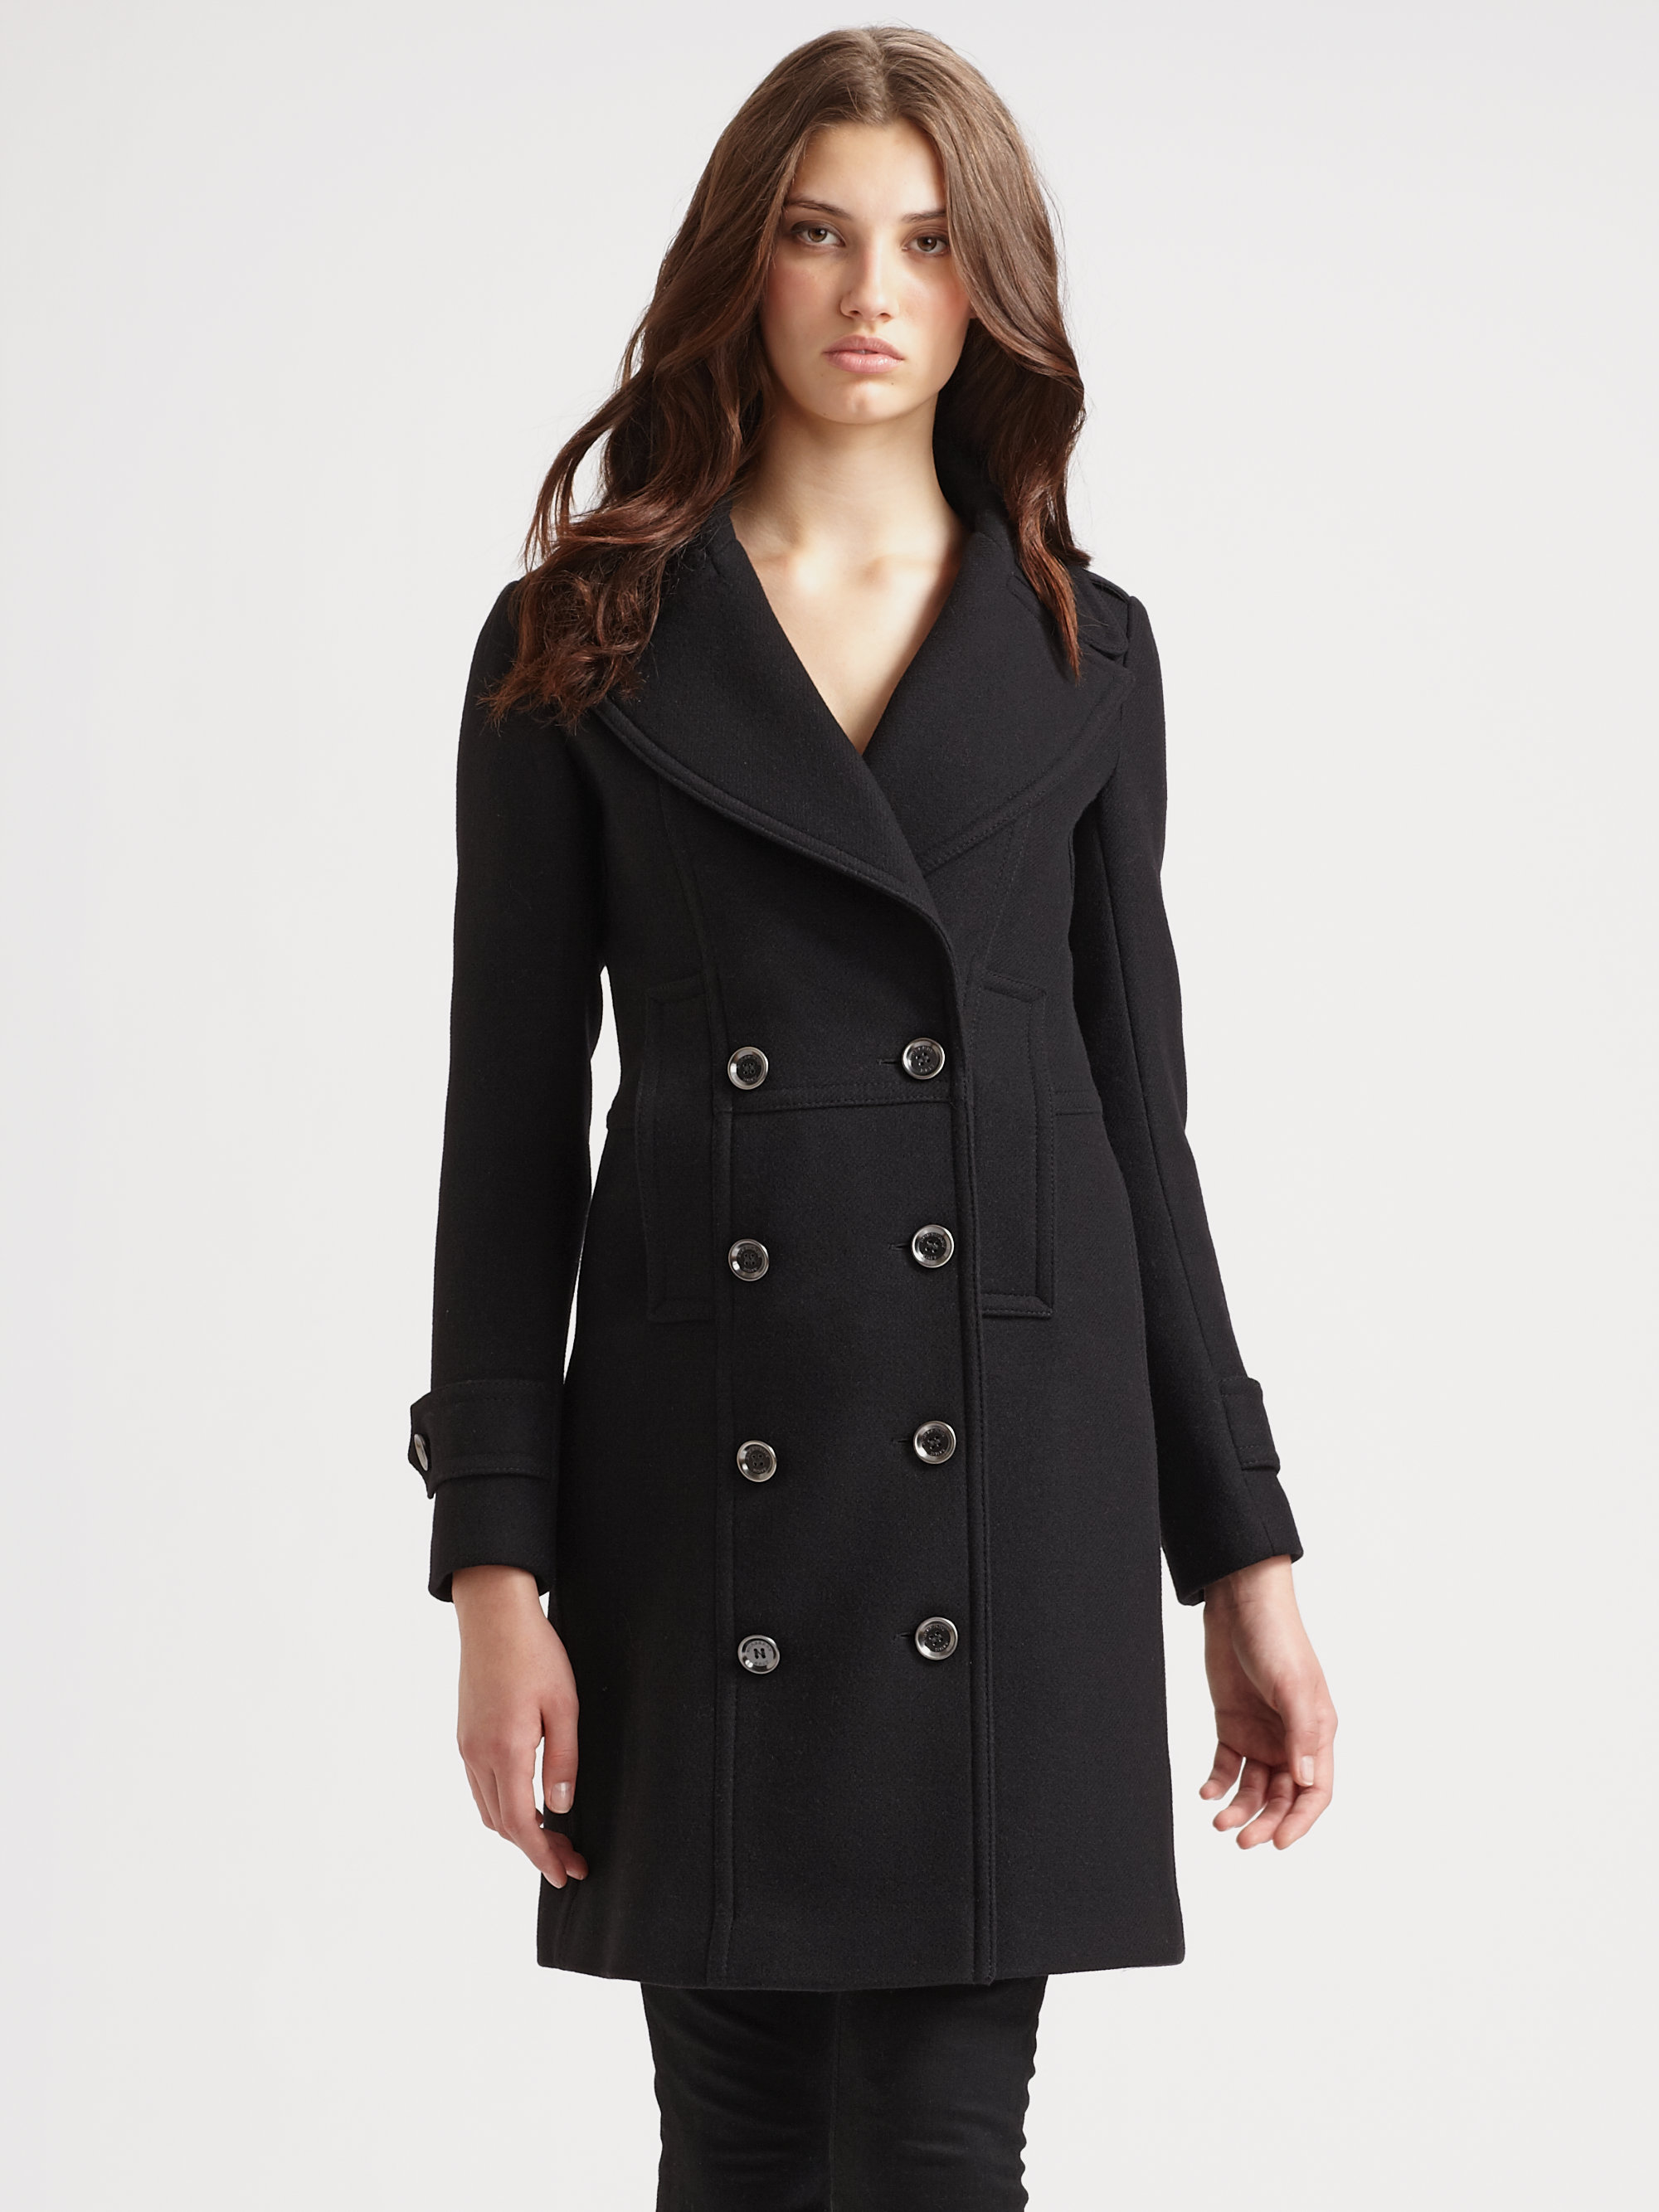 Burberry Brit Double Breasted Wool Coat 